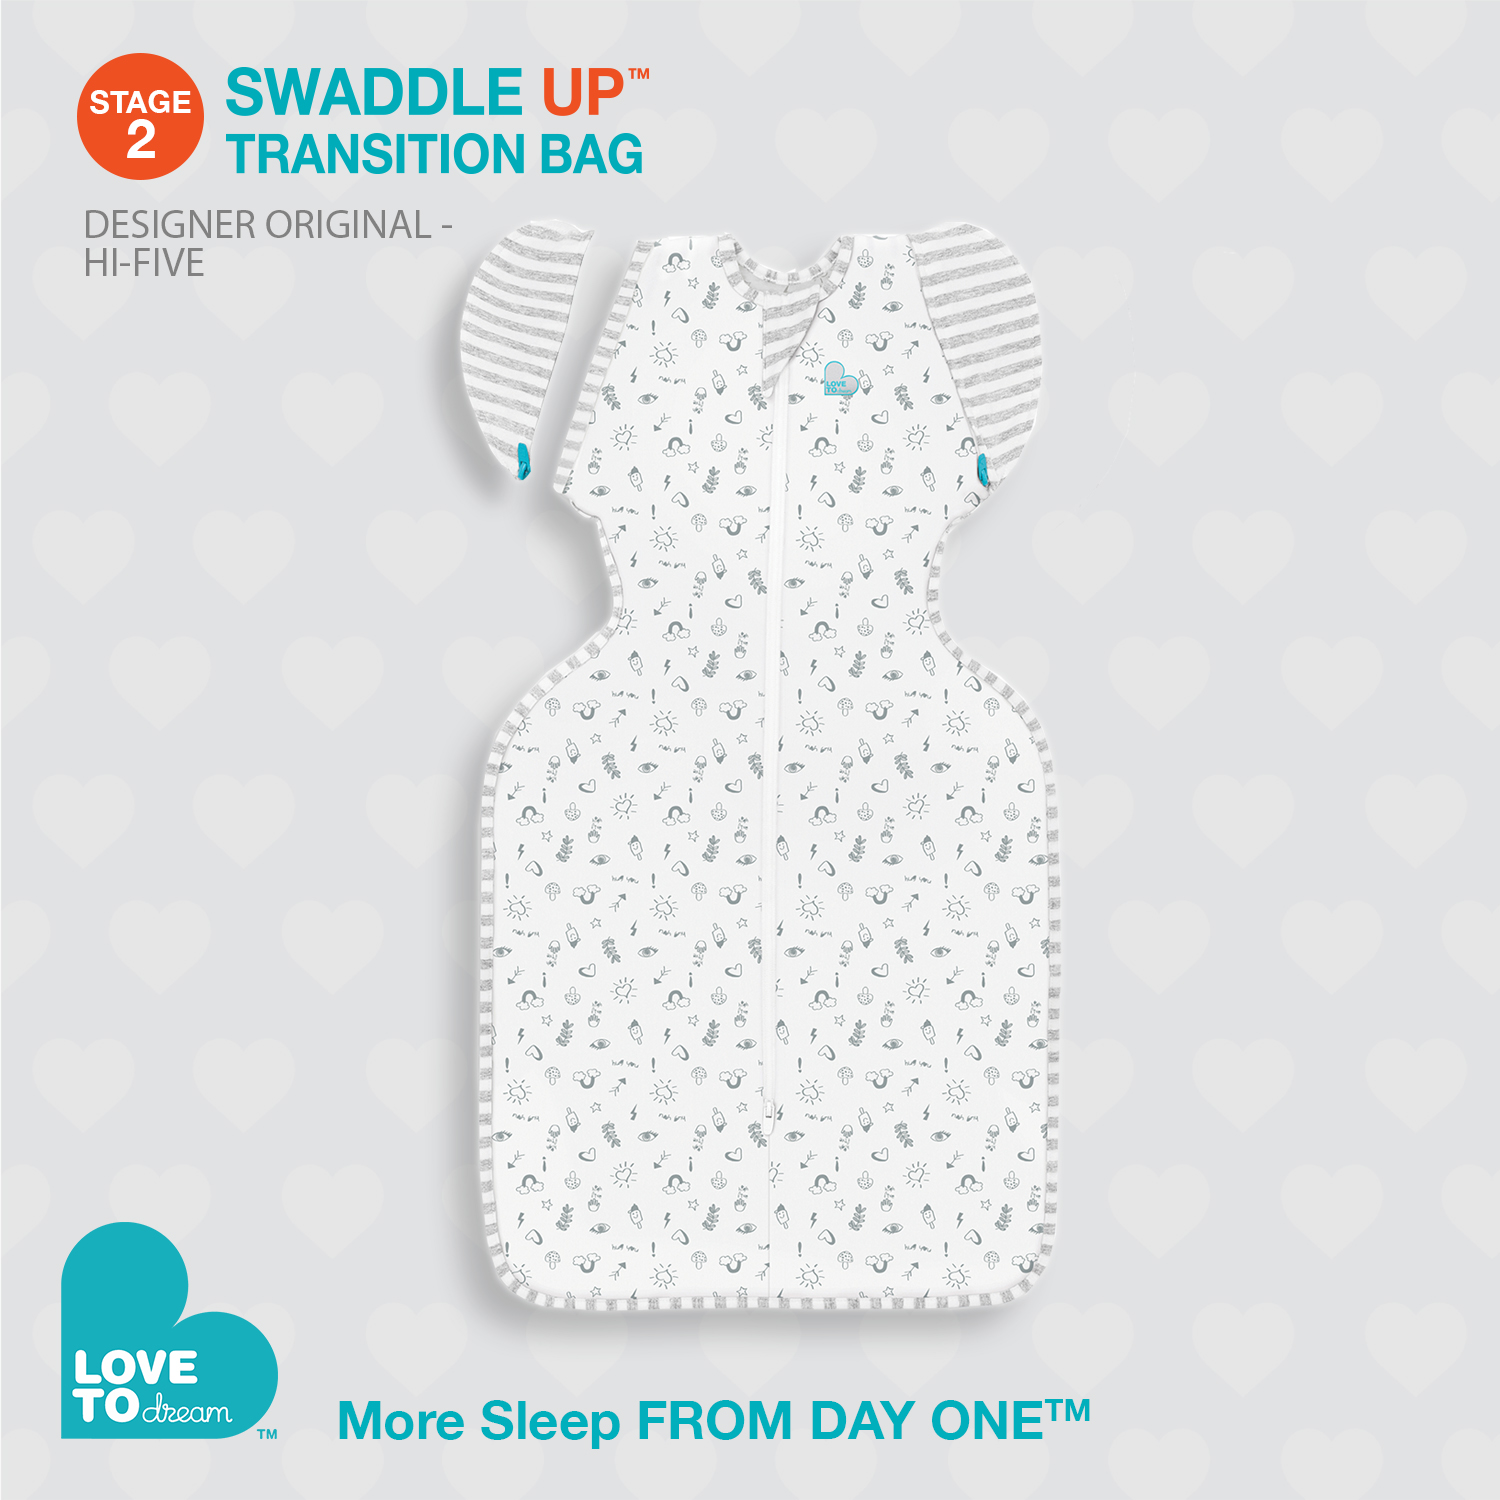 swaddle up stage 1